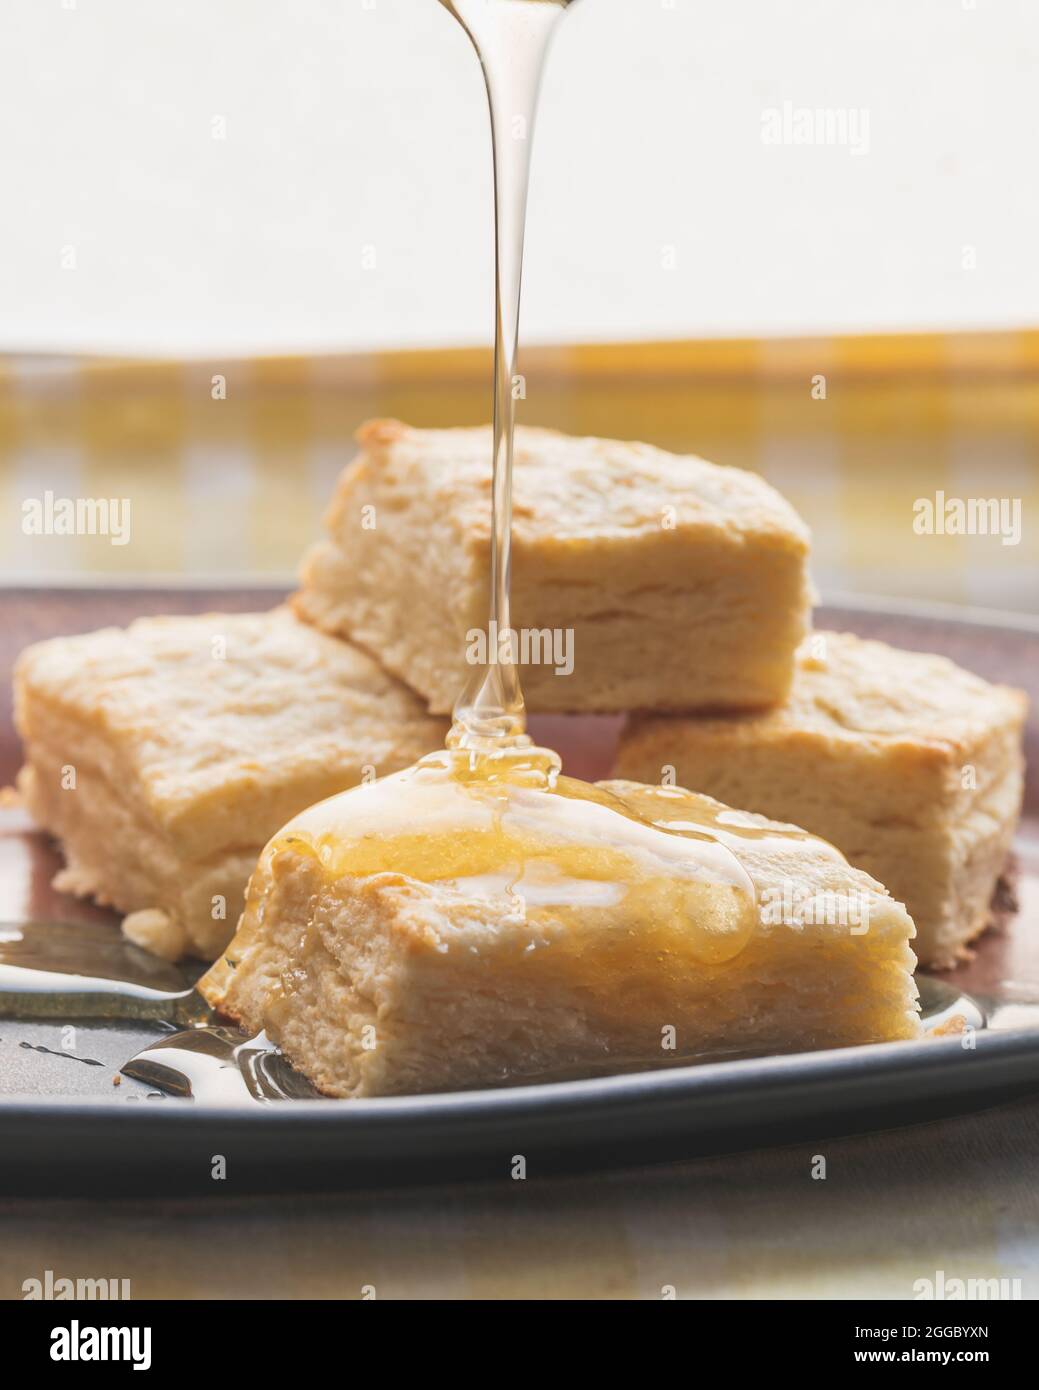 Honey Pouring onto Plate of Biscuits Stock Photo